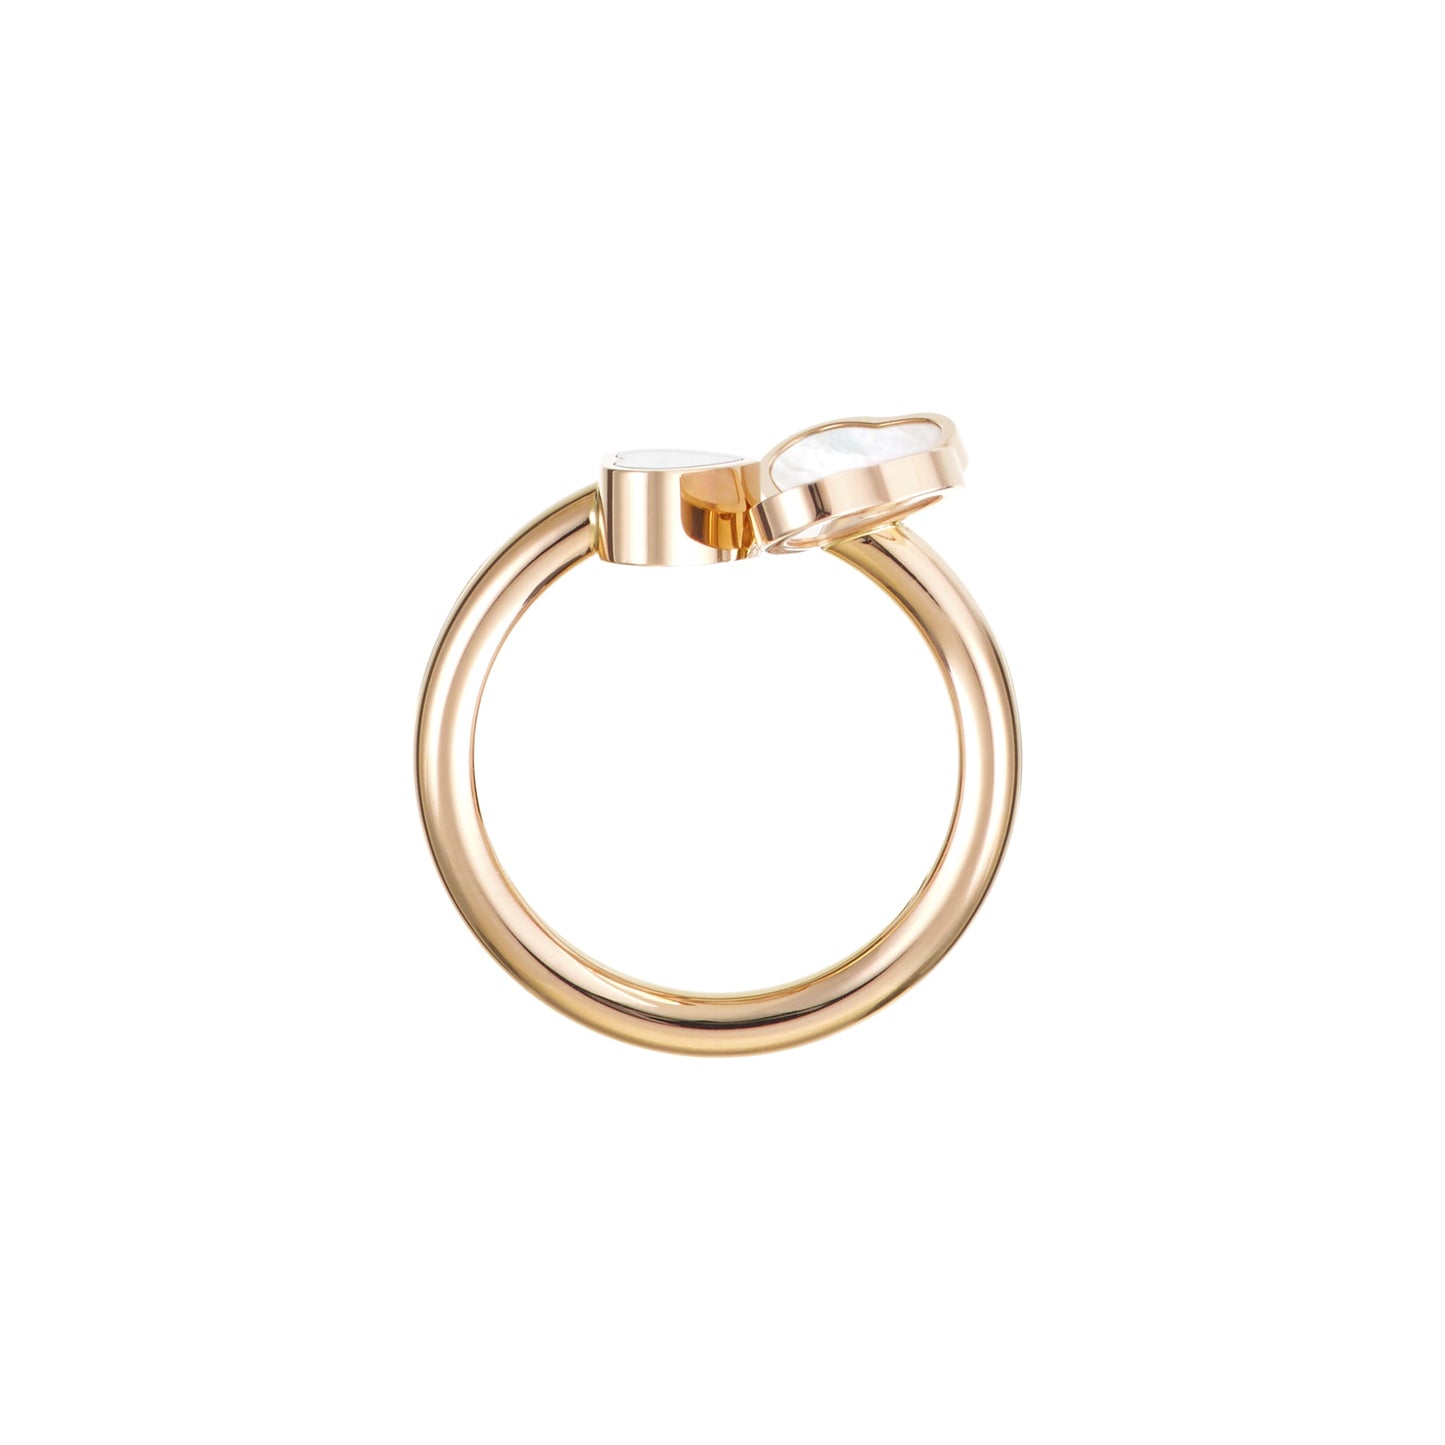 HAPPY HEARTS WINGS RING, ETHICAL ROSE GOLD, DIAMOND, MOTHER-OF-PEARL 82A083-5300